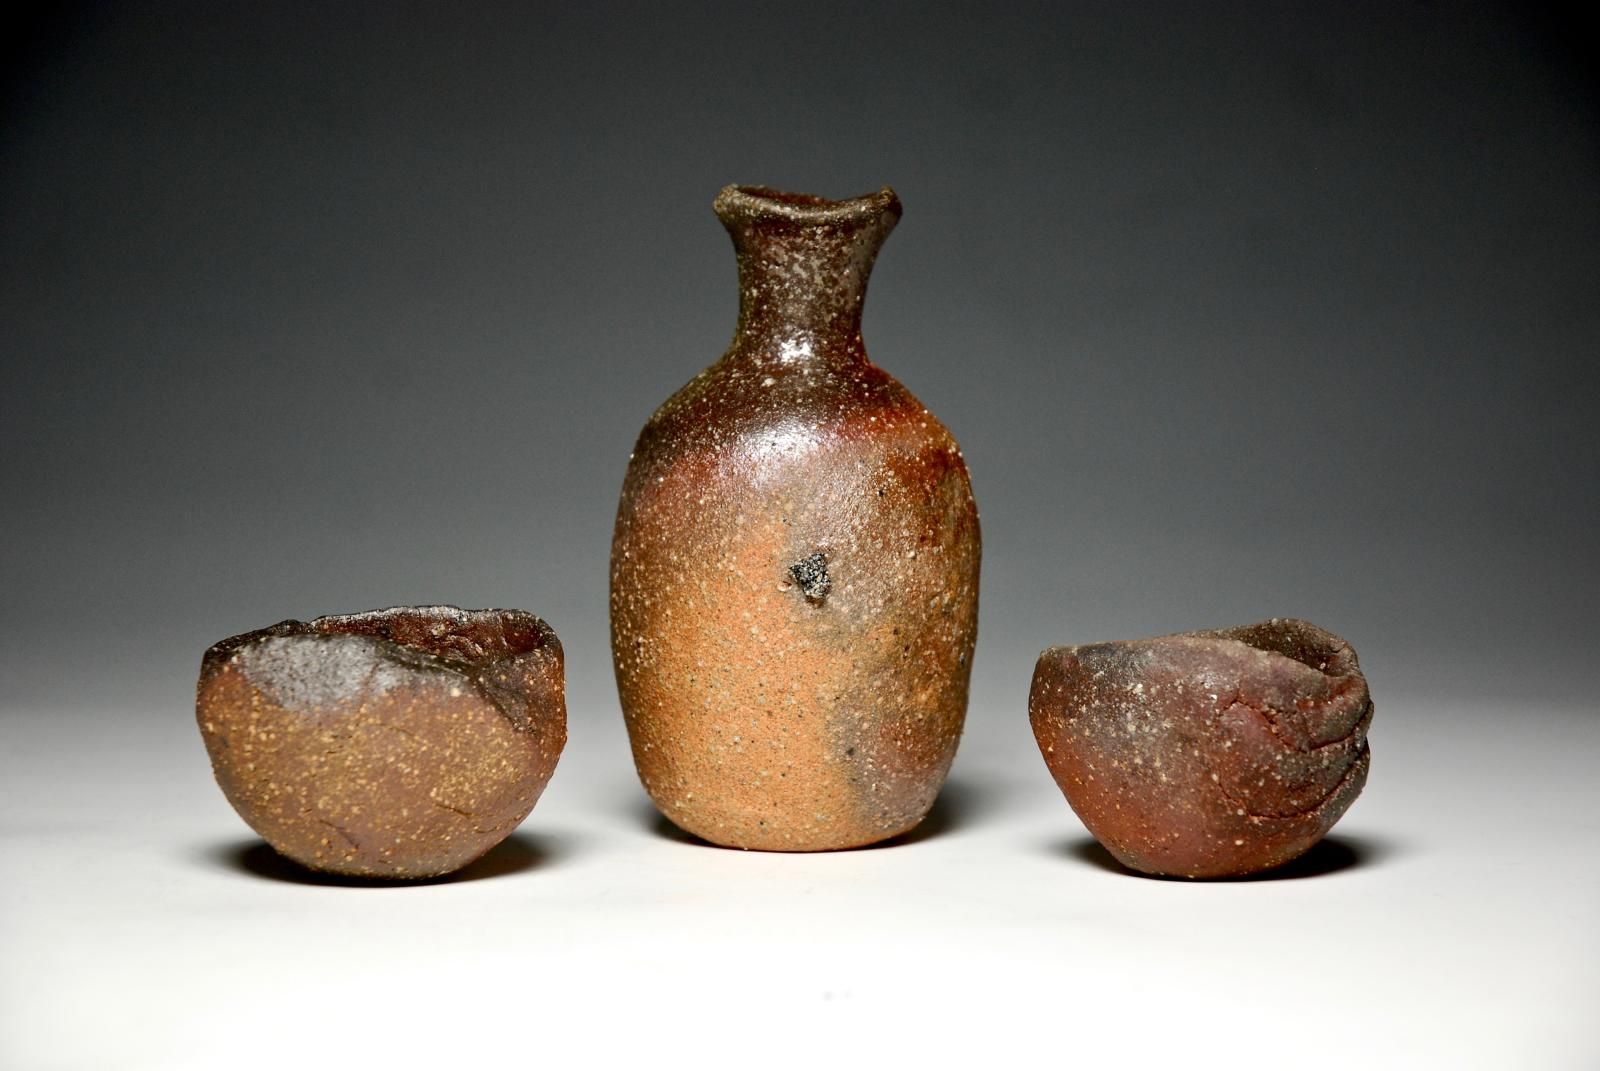 Sake set, 1 Tokkuri with 2 GuinomiVirginia and Minnesota kaolinitic claysCrushed rhyolite and graniteAnagama fired for 4 days to cone 8 by Mitch Iburg